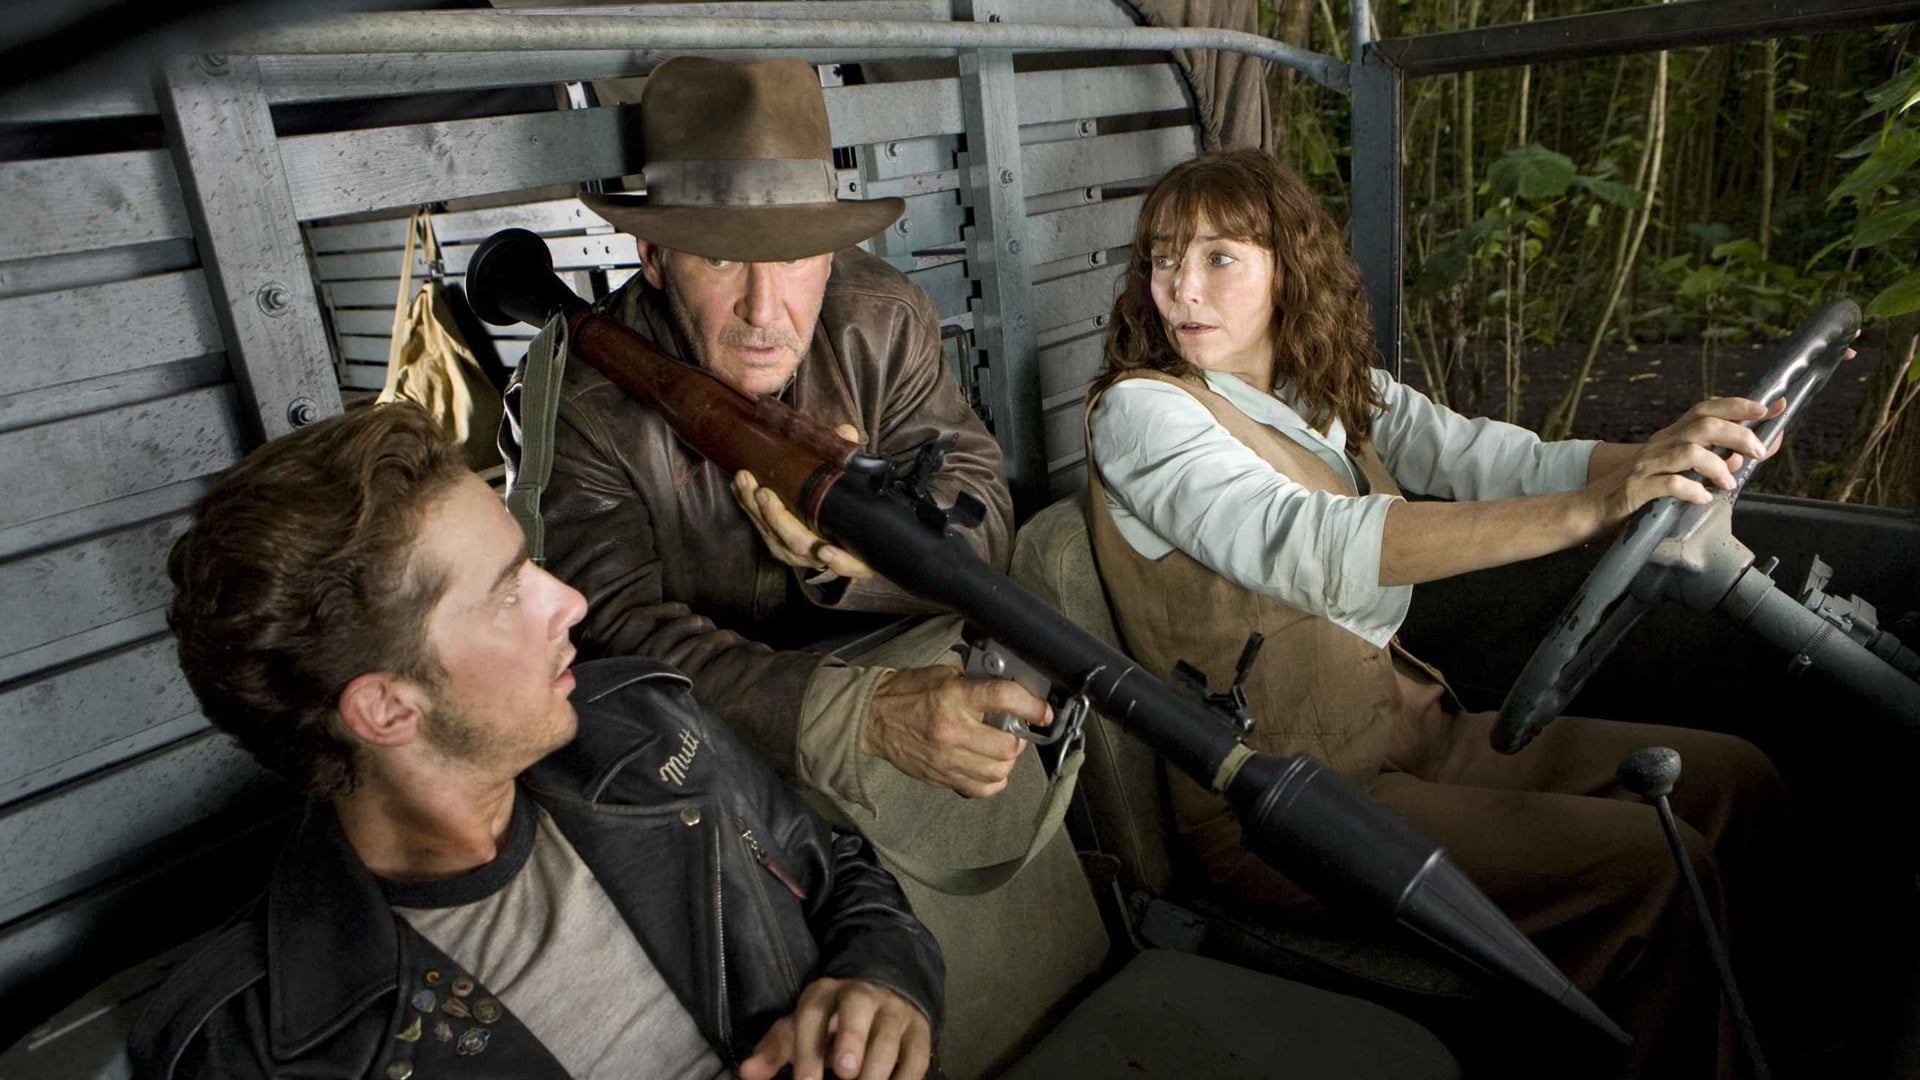 Indiana Jones And The Kingdom Of The Crystal Skull Wallpapers